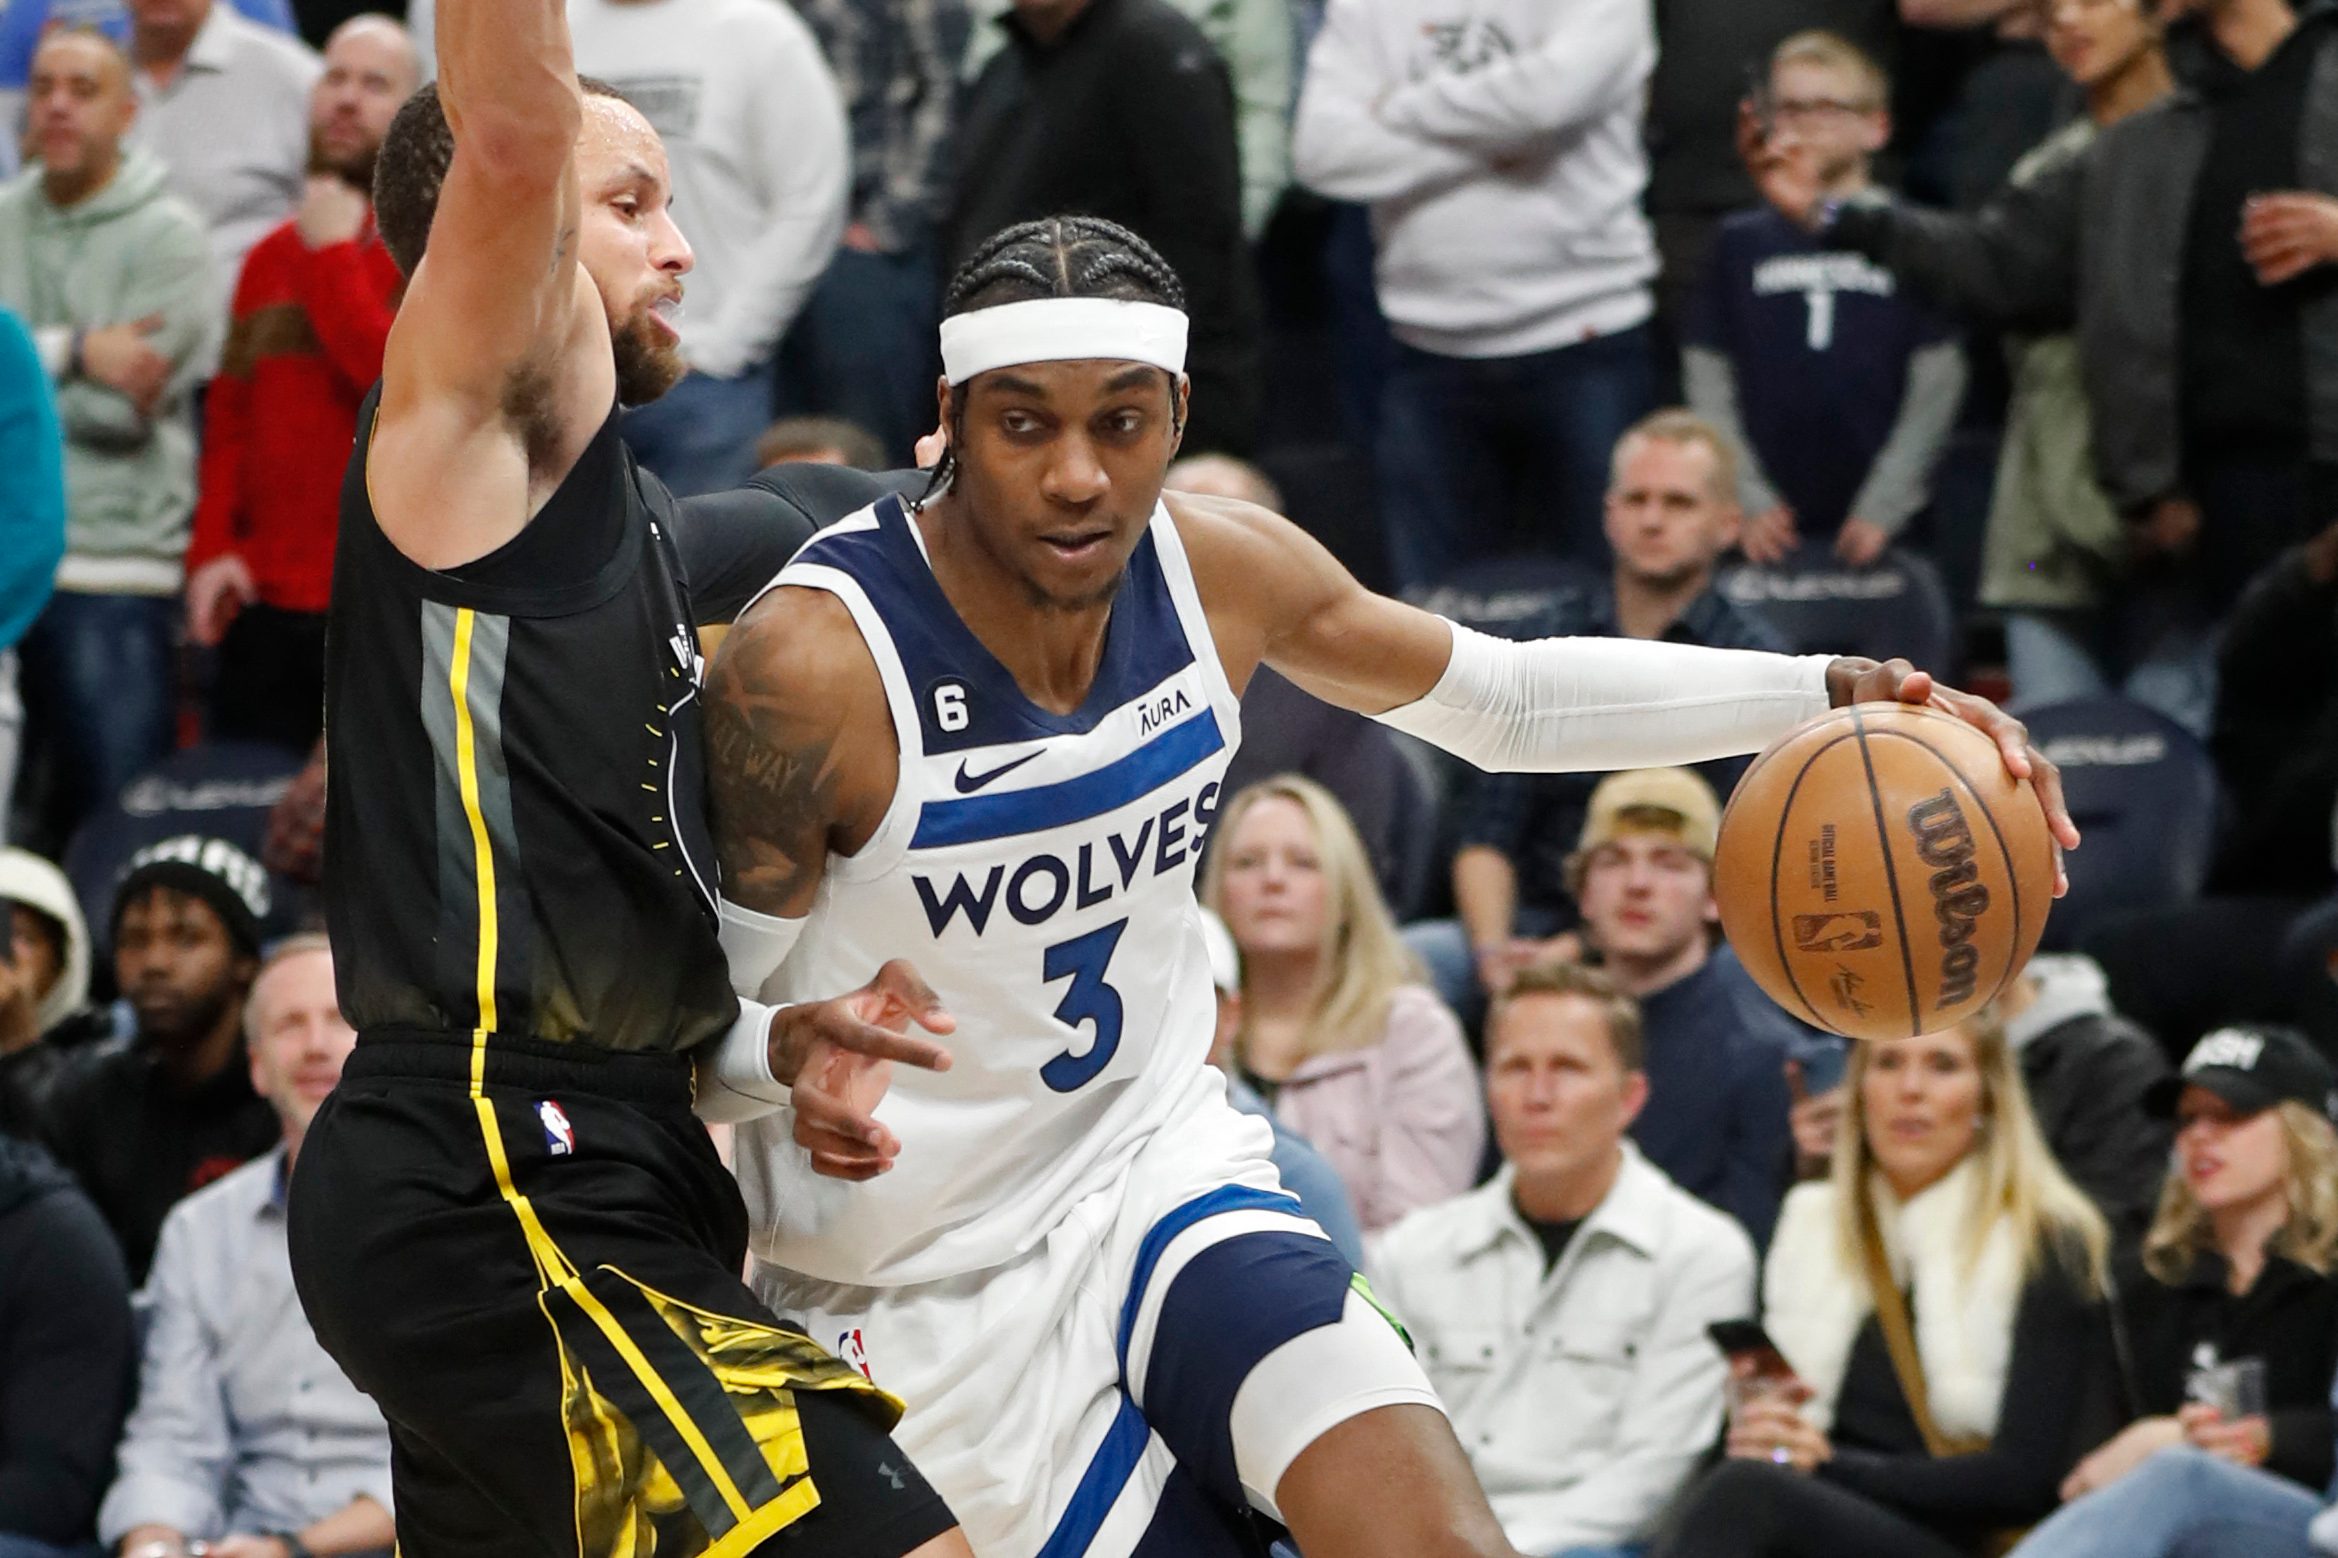 Timberwolves push past Warriors in overtime